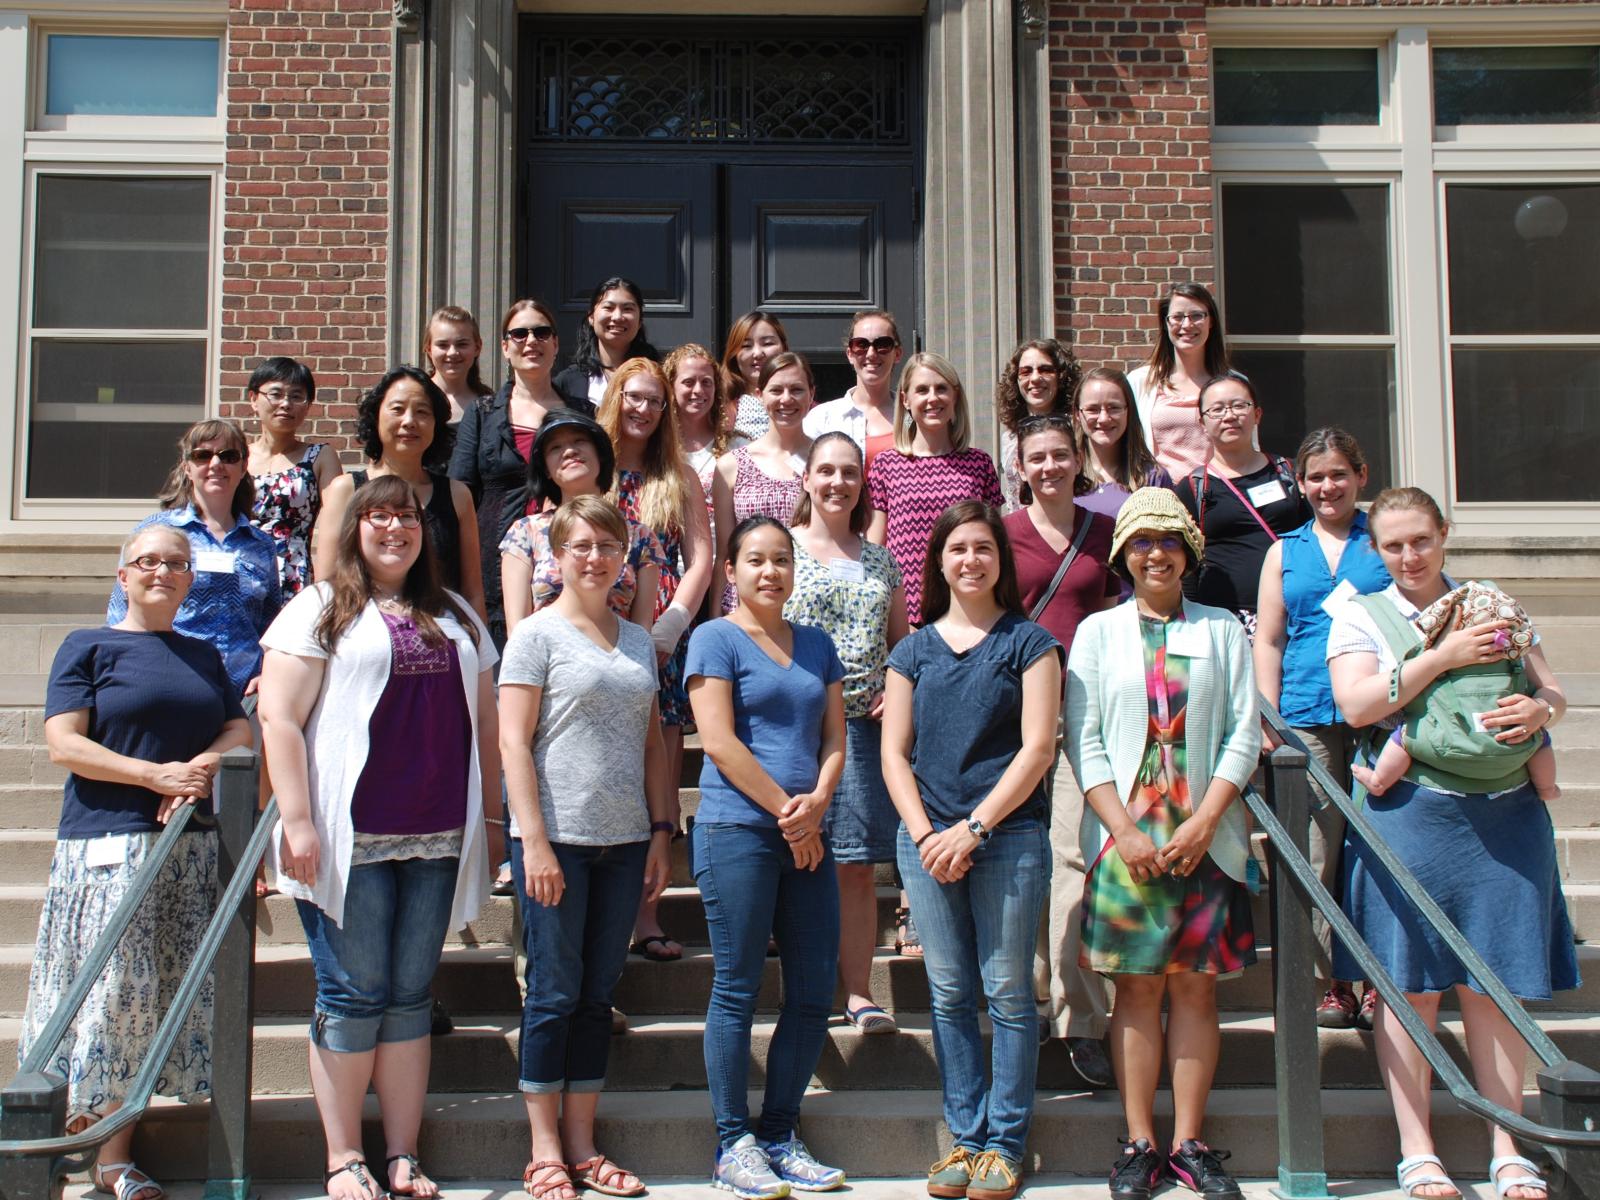 Group photo of Emilie Purvine standing alongside fellow 2016 Women in Computational Topology participants.